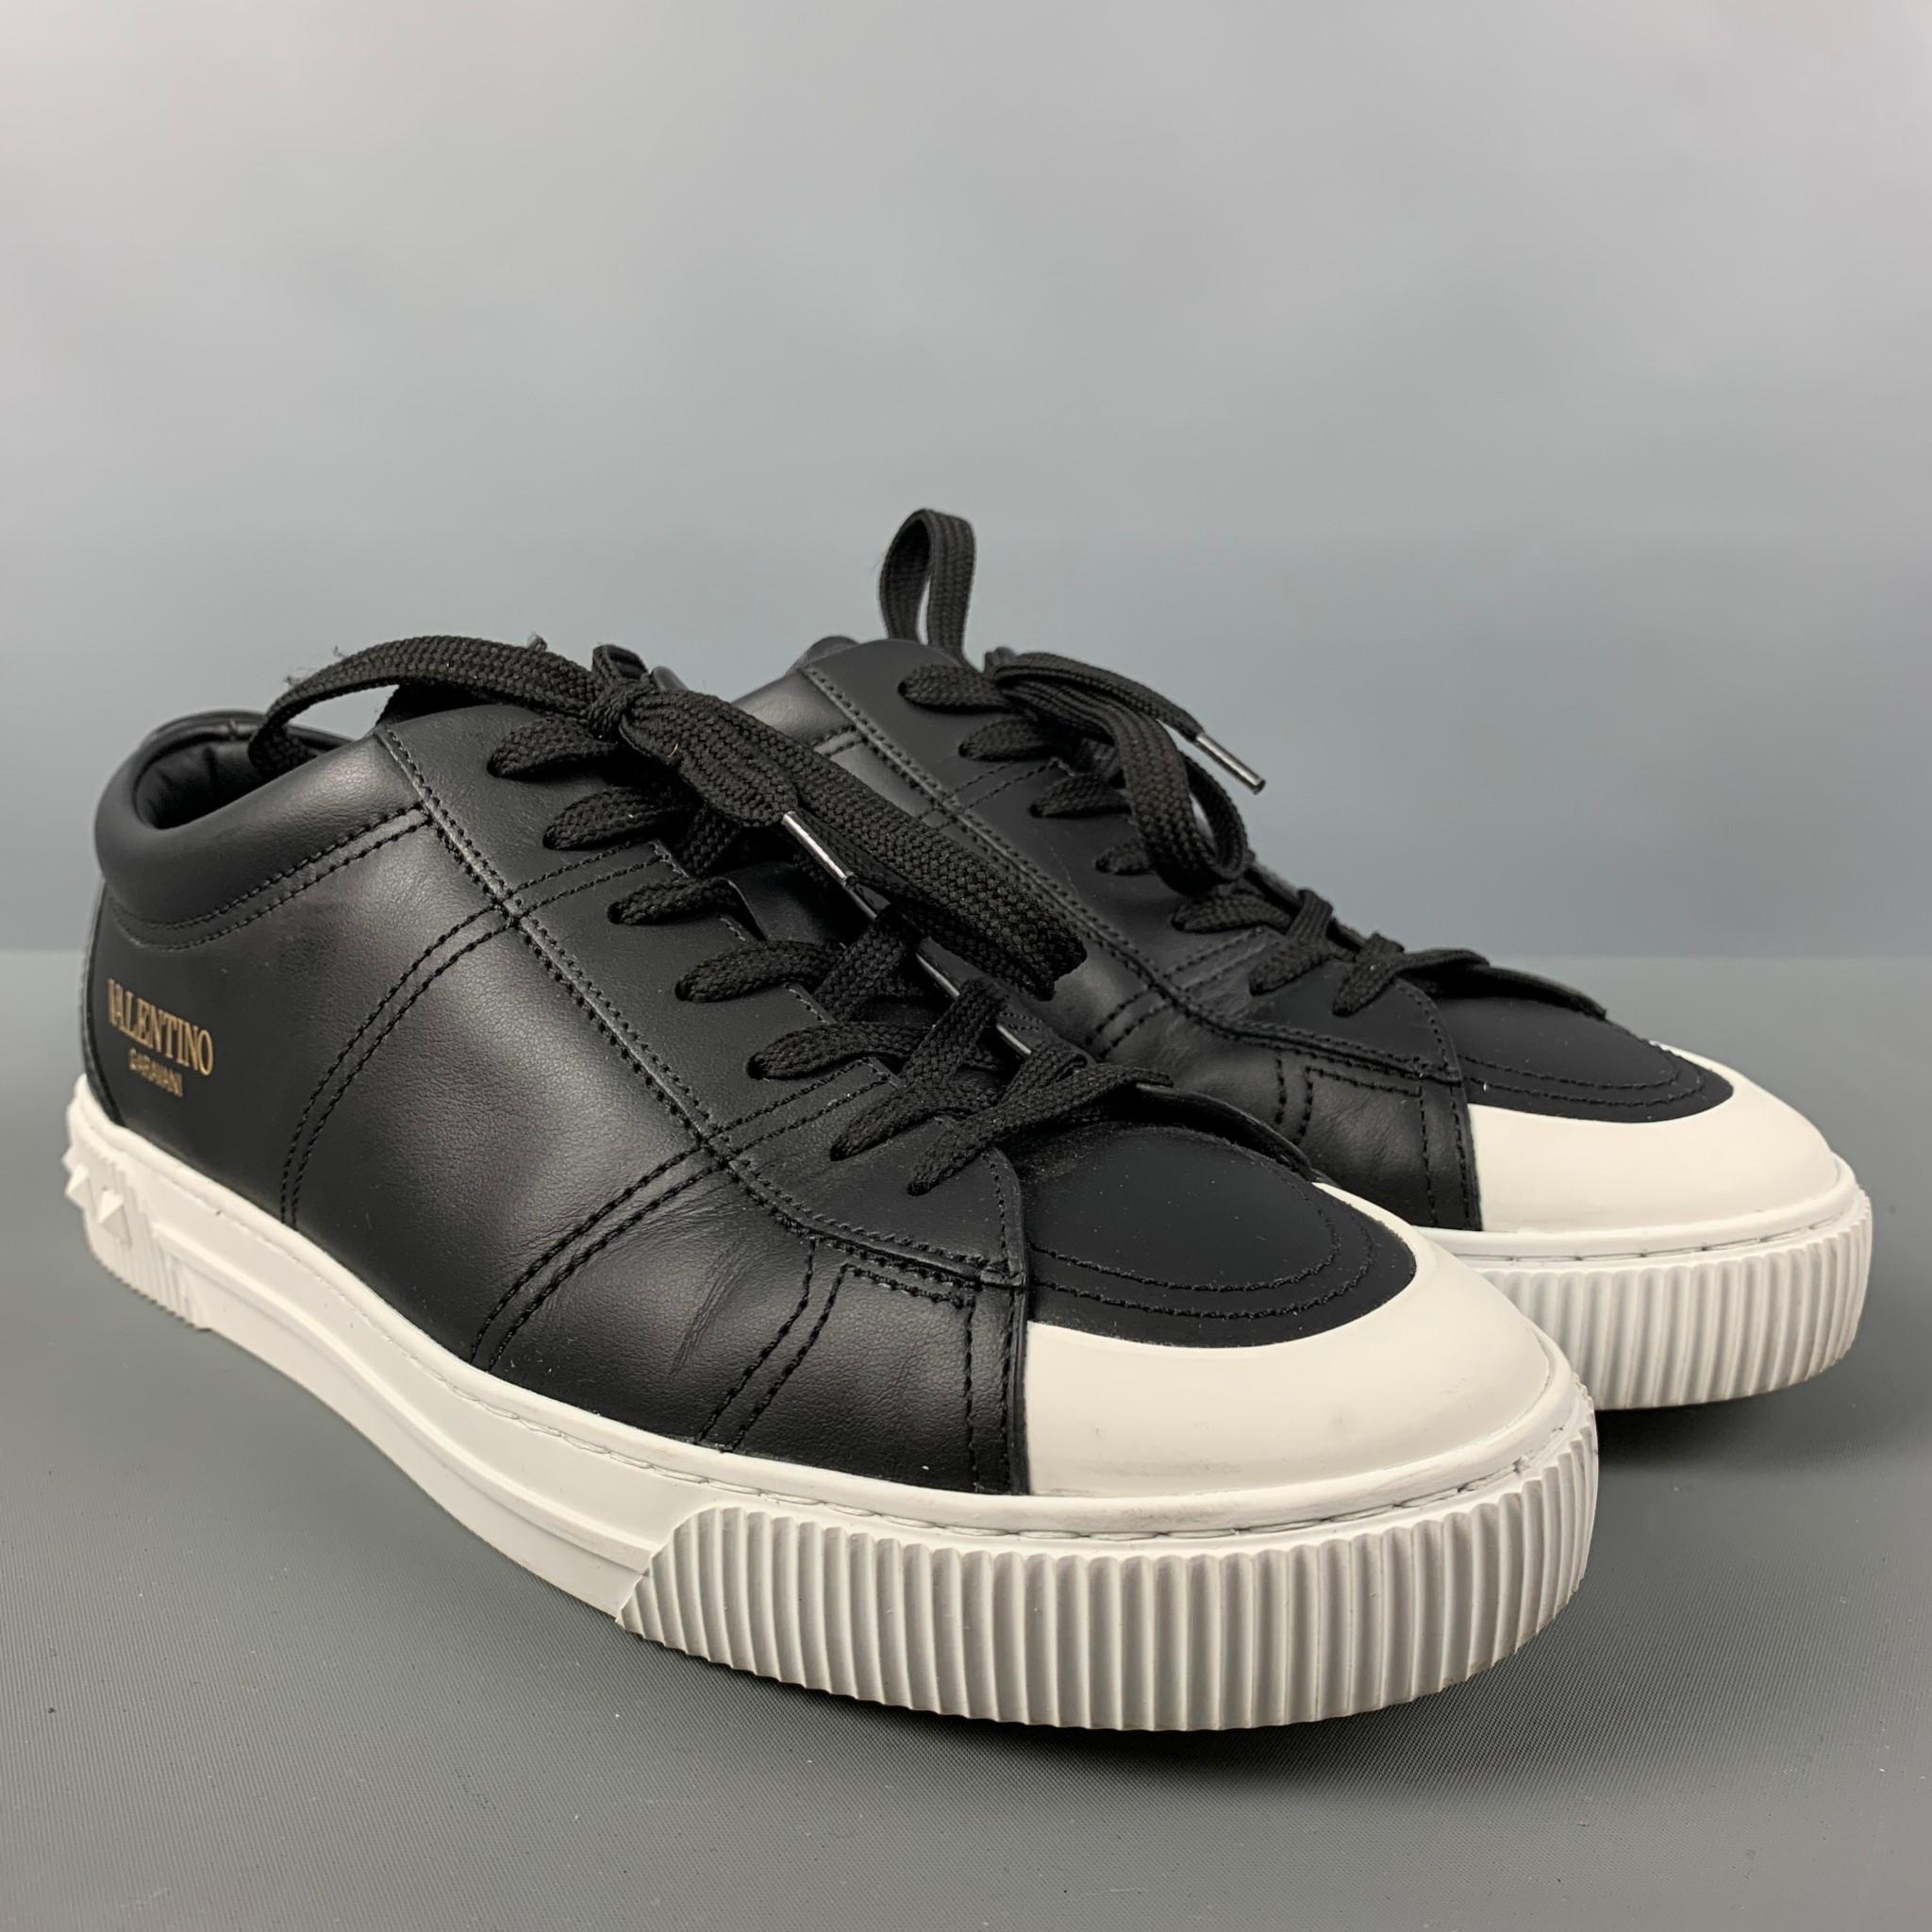 VALENTINO 'City Planet Rockstud' sneakers comes in a black and white leather featuring a low-top style, white studs, and a lace up closure. Made in Italy.

Very Good Pre-Owned Condition.
Marked: S1F90Y2 41

Measurements: 

Length: 11.5 in.
Width: 4